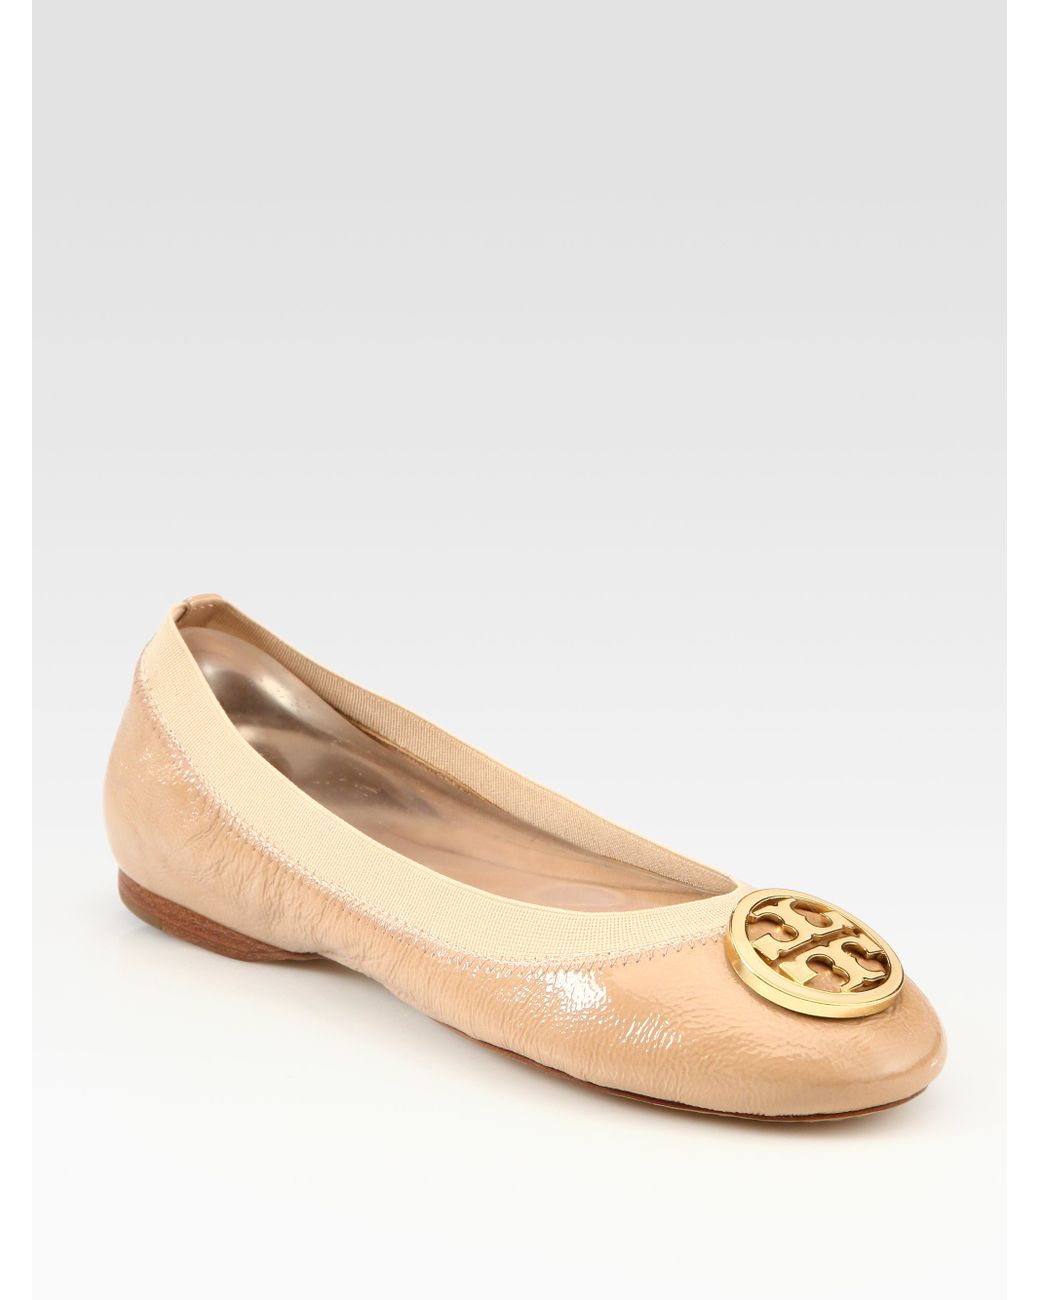 Tory Burch Caroline Patent Leather Logo Ballet Flats in Natural | Lyst